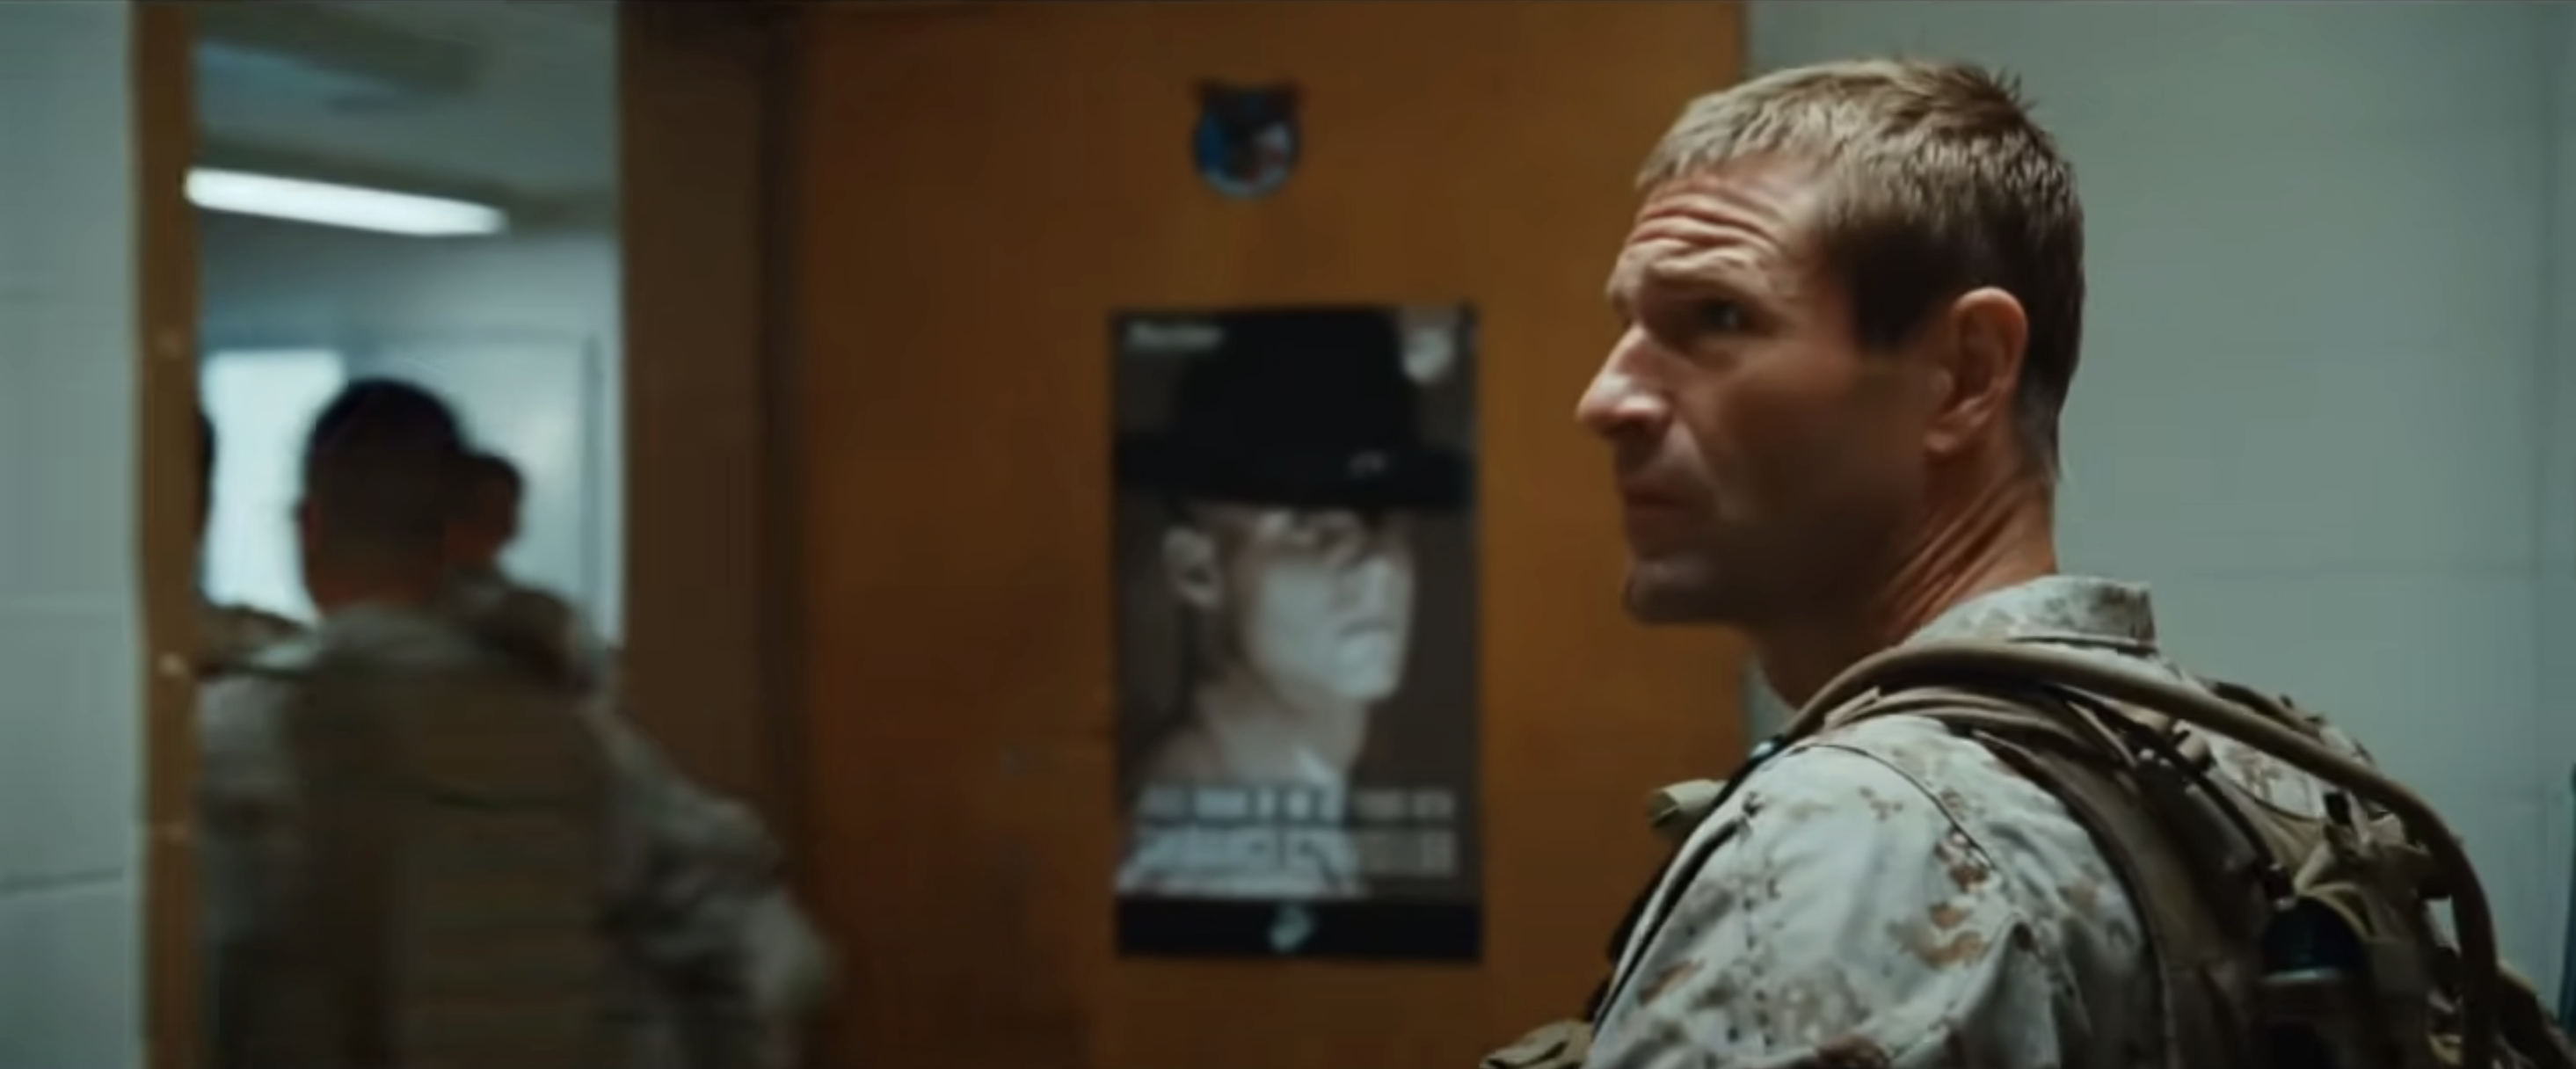 Michael in military gear standing in a hallway, looking back over his shoulder, next to a door with a poster